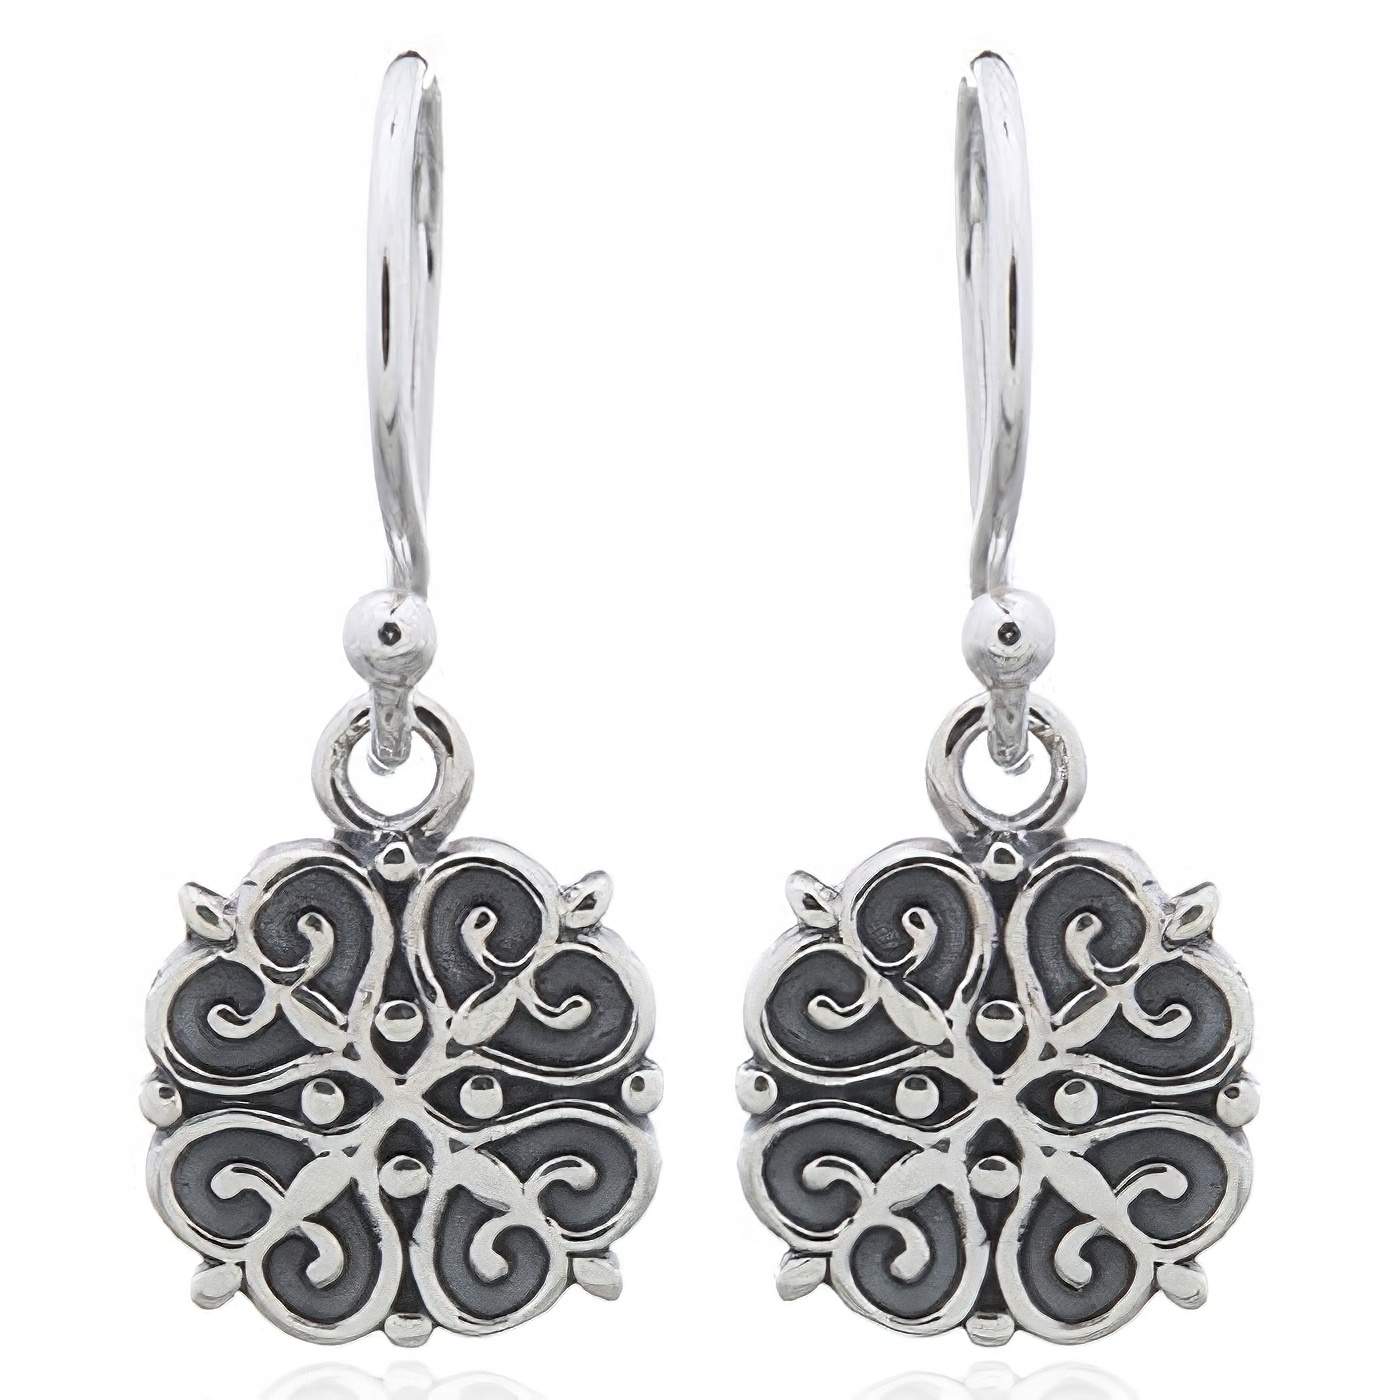 Floral Ajoure Antiqued 925 Silver Dangle Earrings by BeYindi 